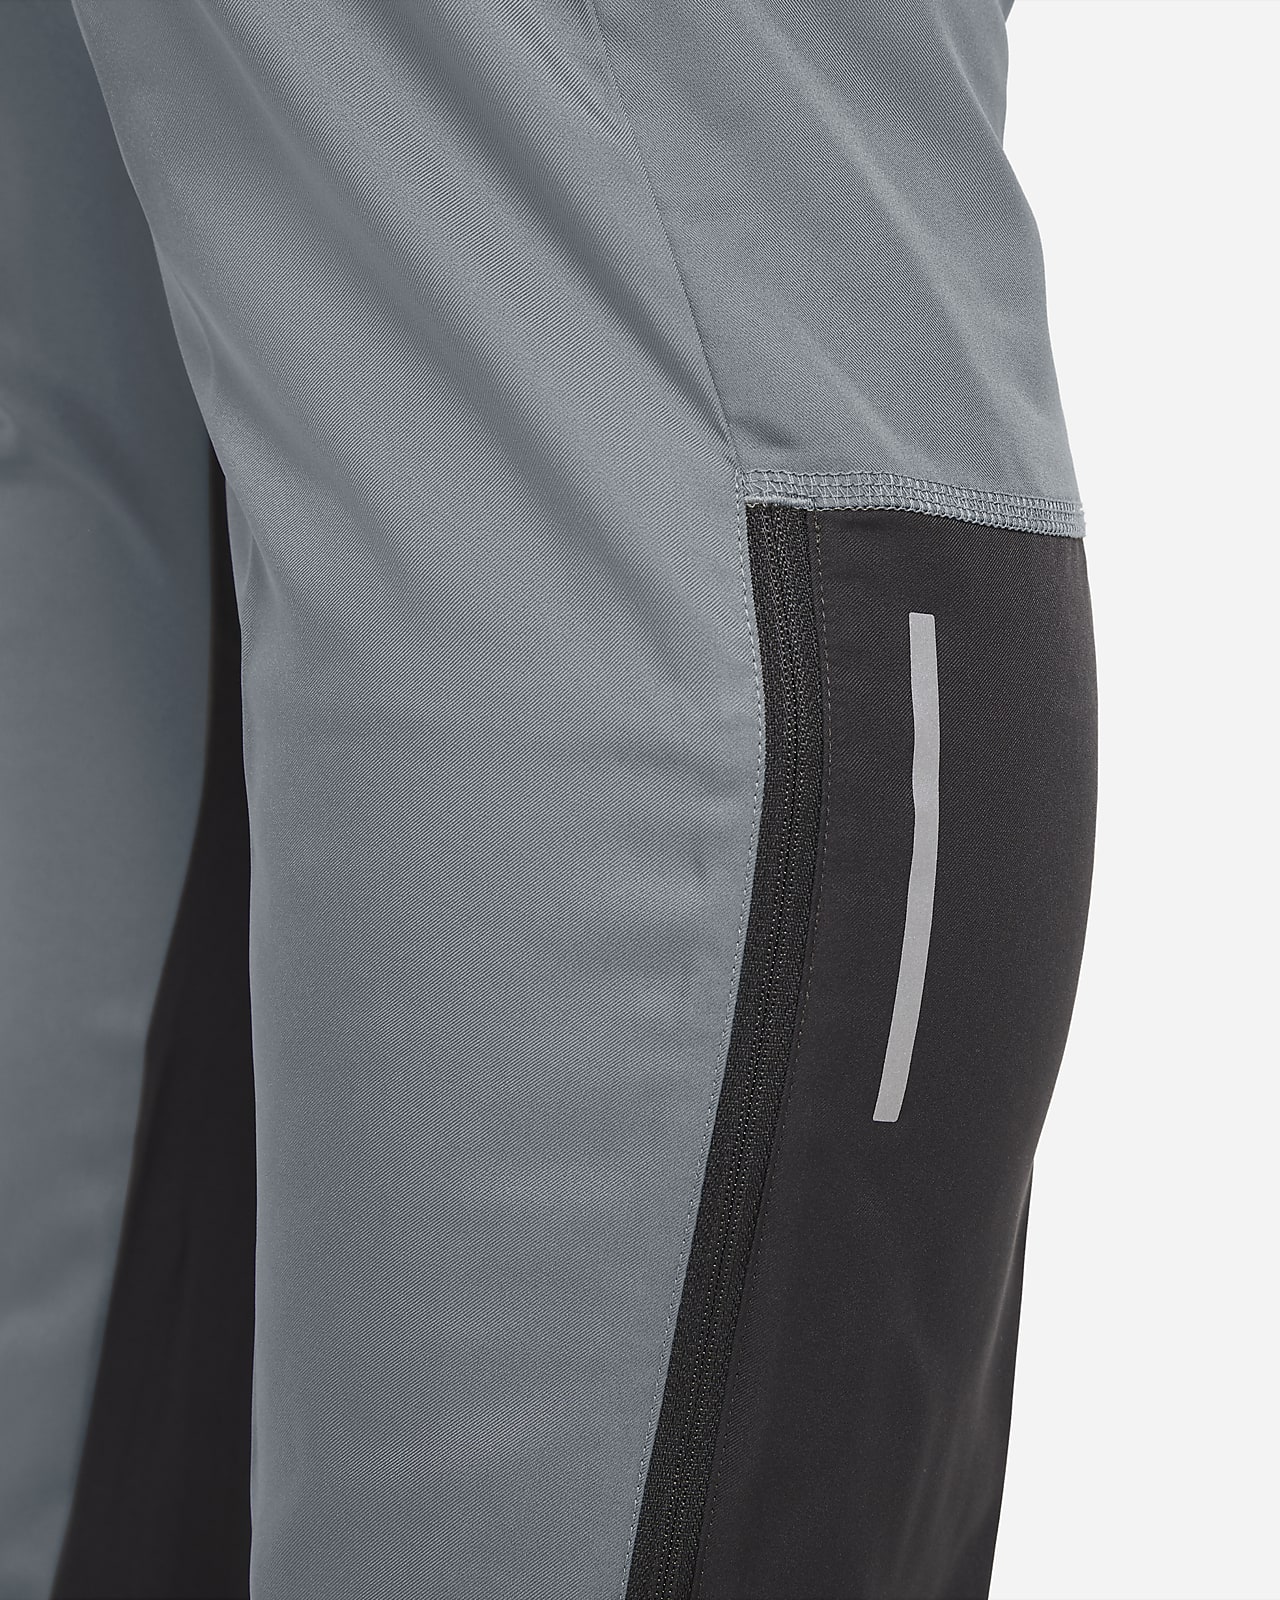 men's woven running trousers nike essential